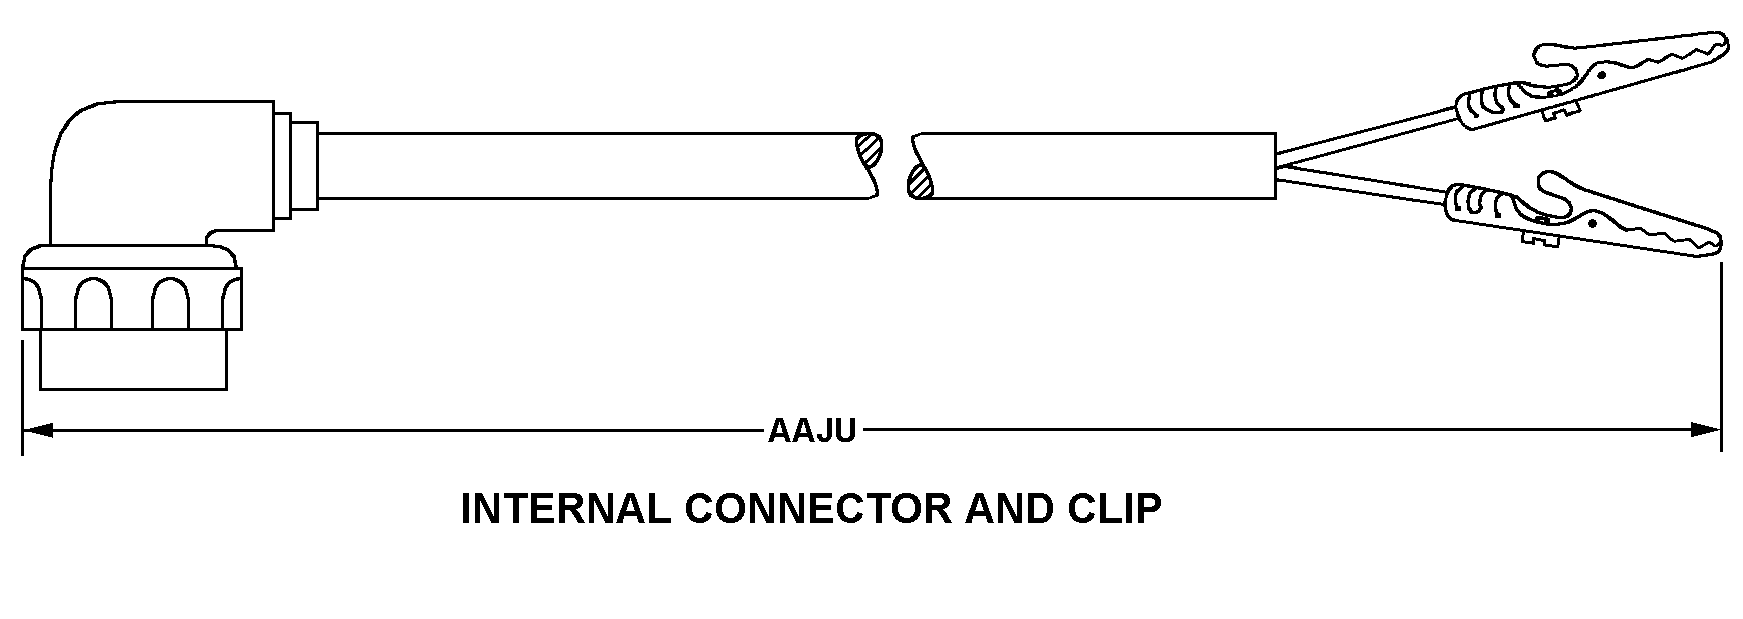 INTERNAL CONNECTOR AND CLIP style nsn 5995-00-239-6074